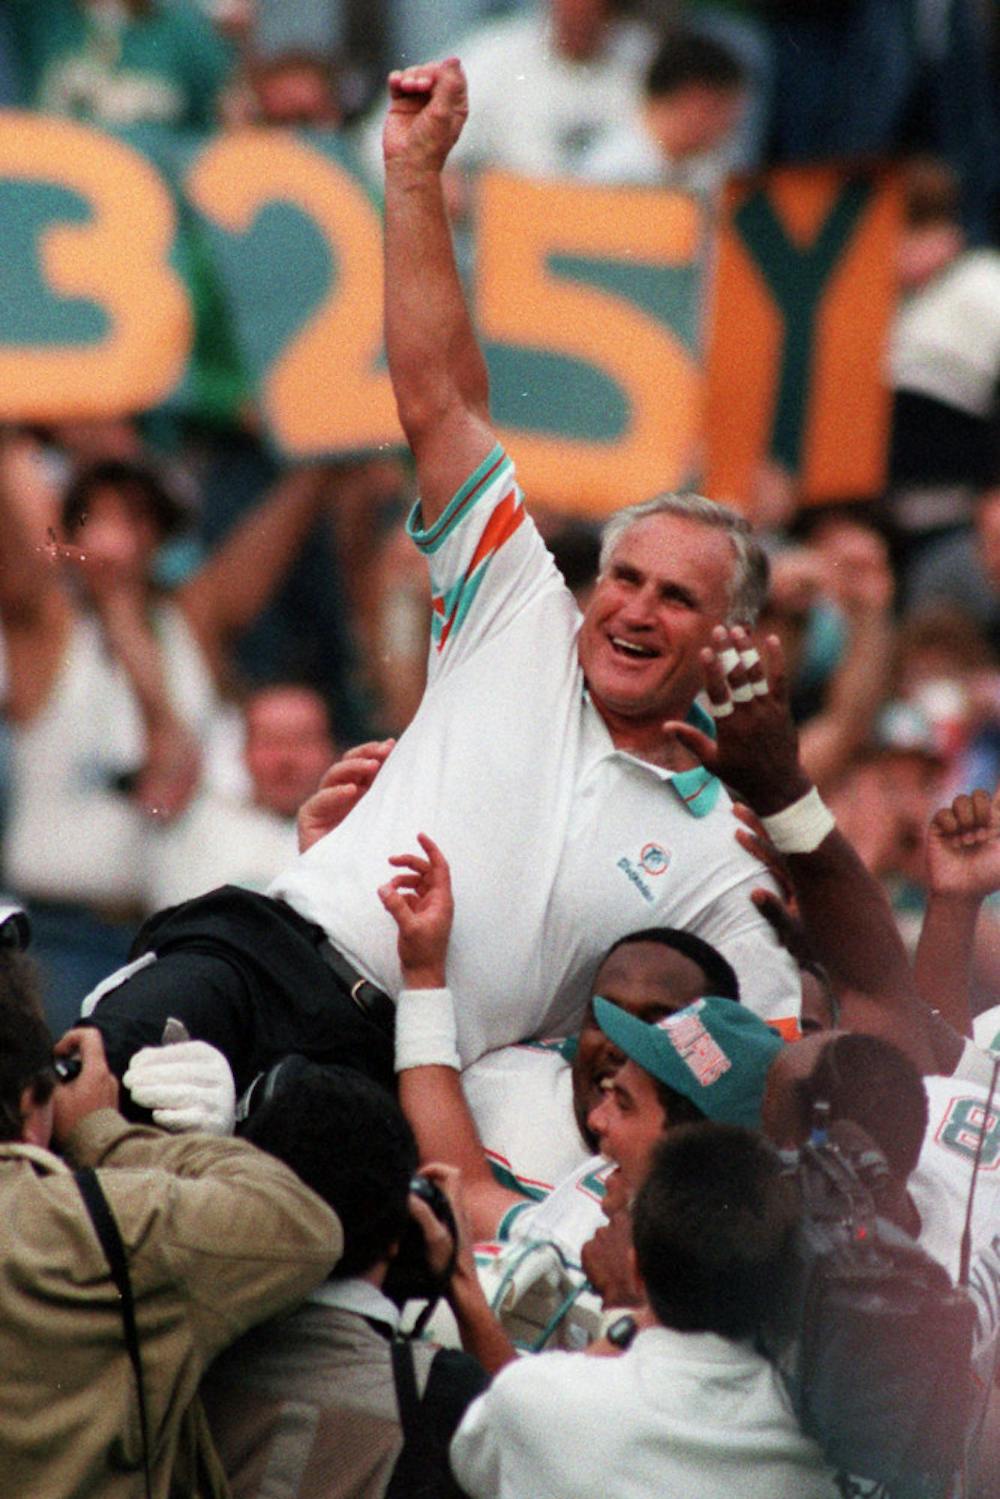 <p>FILE - In this Nov. 14, 1993, file photo, Miami Dolphins coach Don Shula is carried on his team's shoulders after his 325th victory, at Philadelphia's Veterans Stadium. Shula, who won the most games of any NFL coach and led the Miami Dolphins to the only perfect season in league history, died Monday, May 4, 2020, at his home in Indian Creek, Fla., the team said. He was 90. (AP Photo/Amy Sancetta, File)</p>